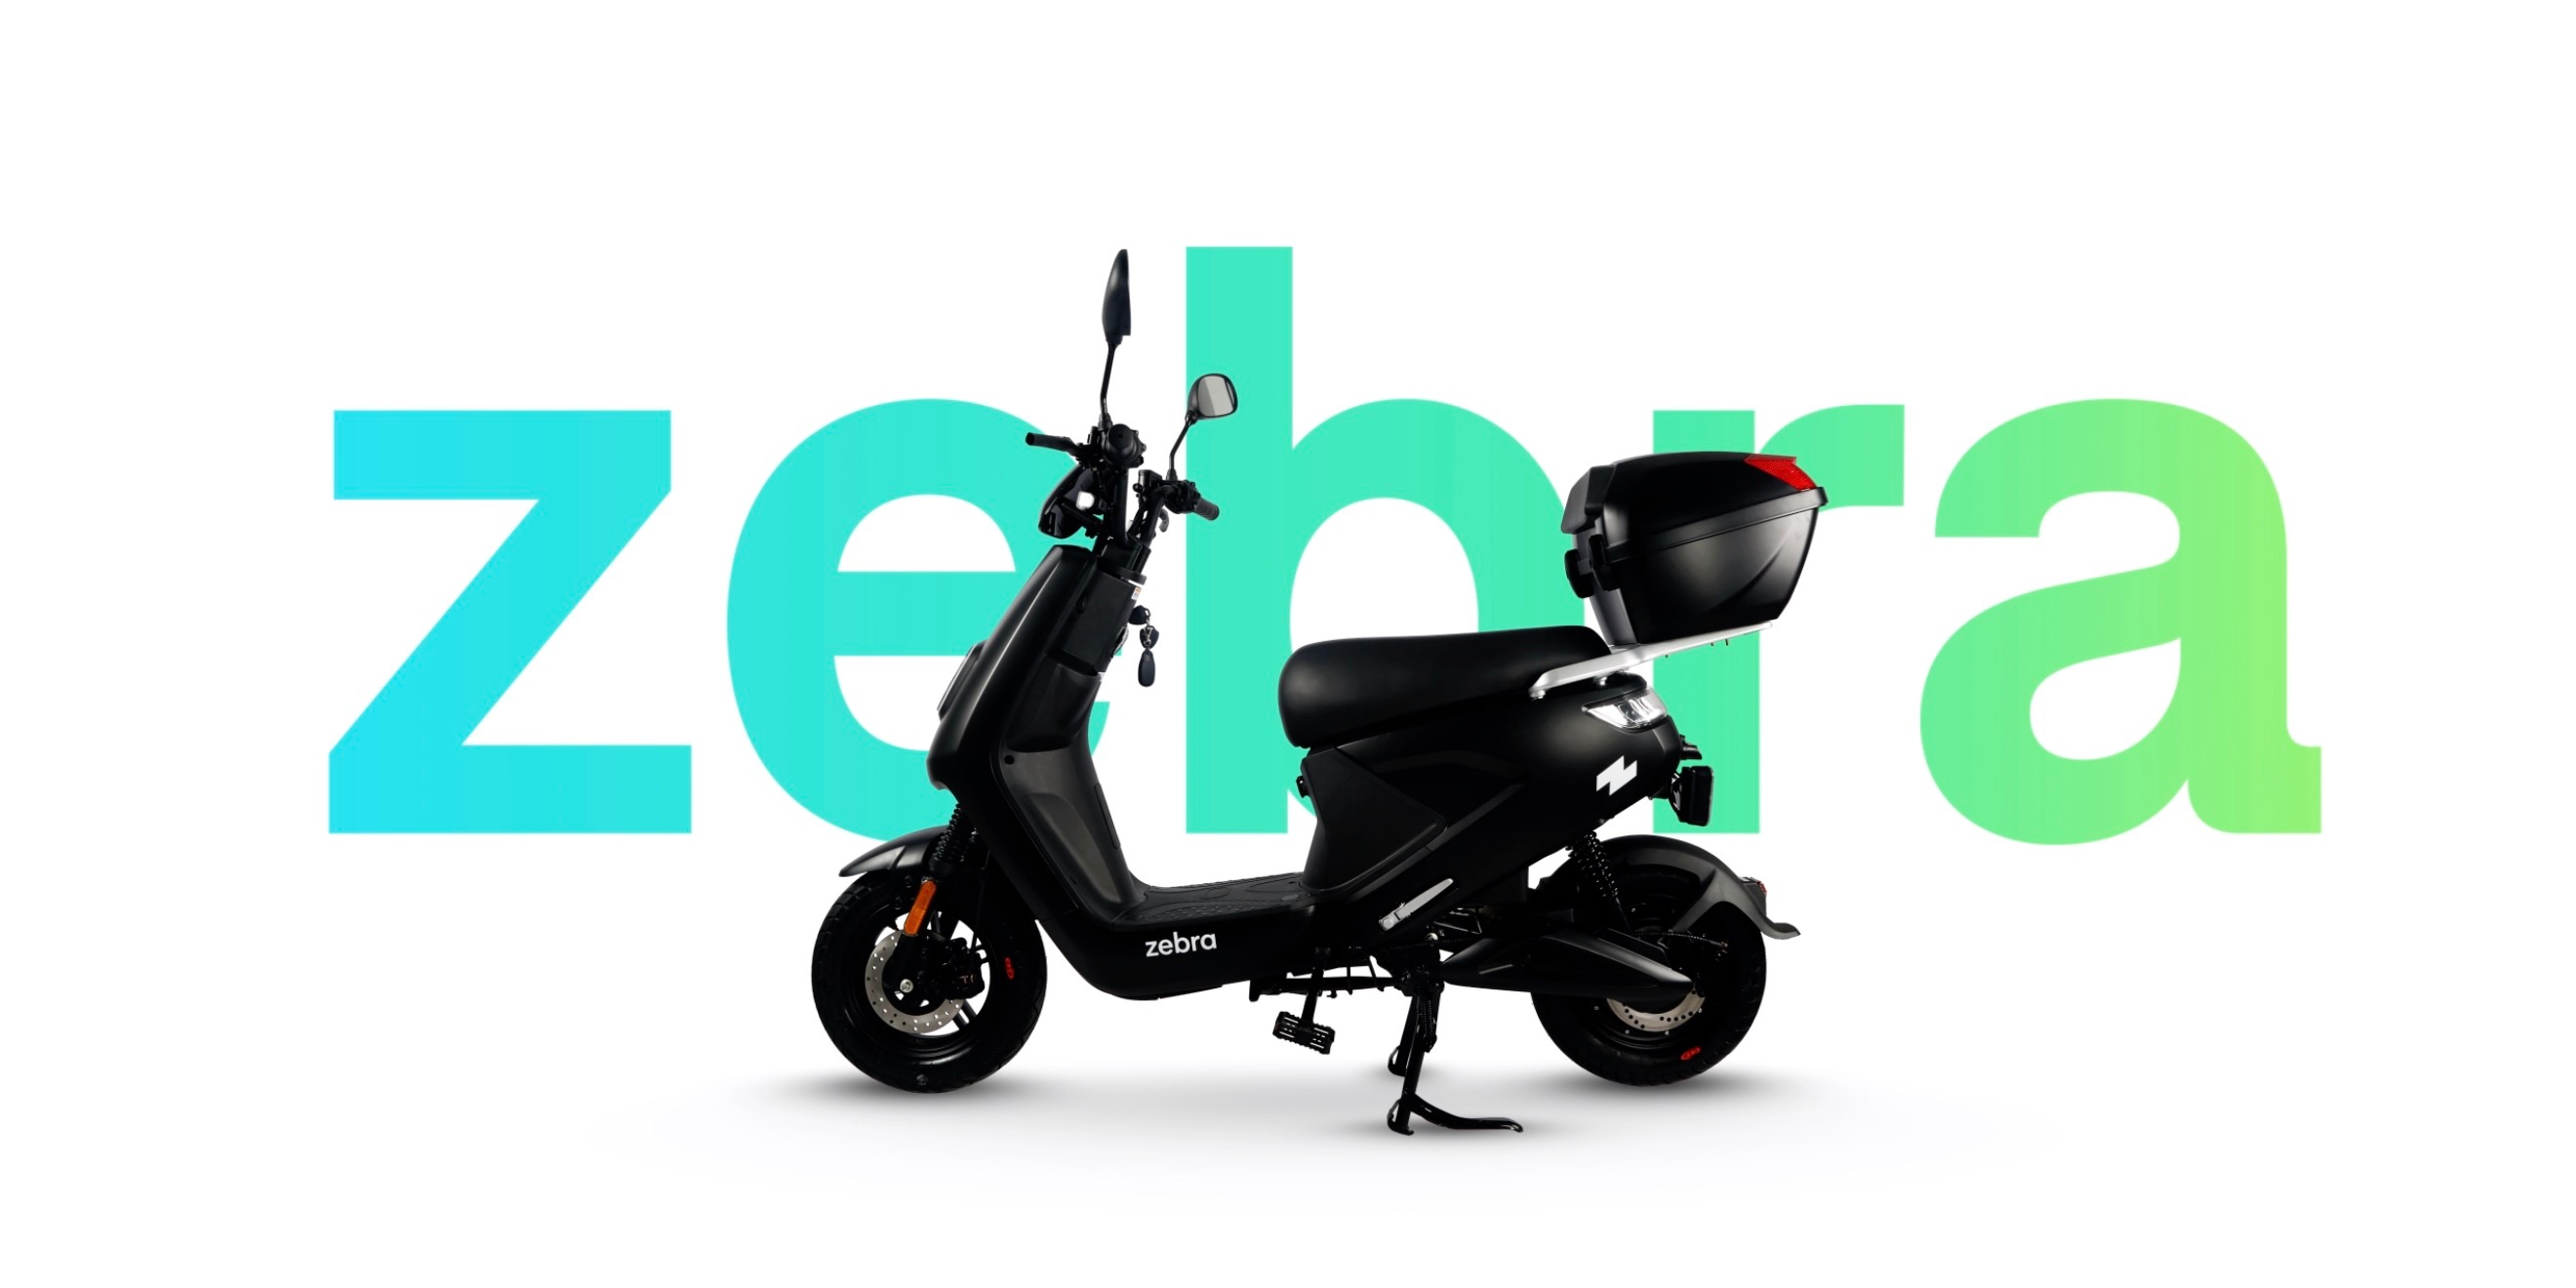 This Vespa-style seated electric scooter technically an electric bike